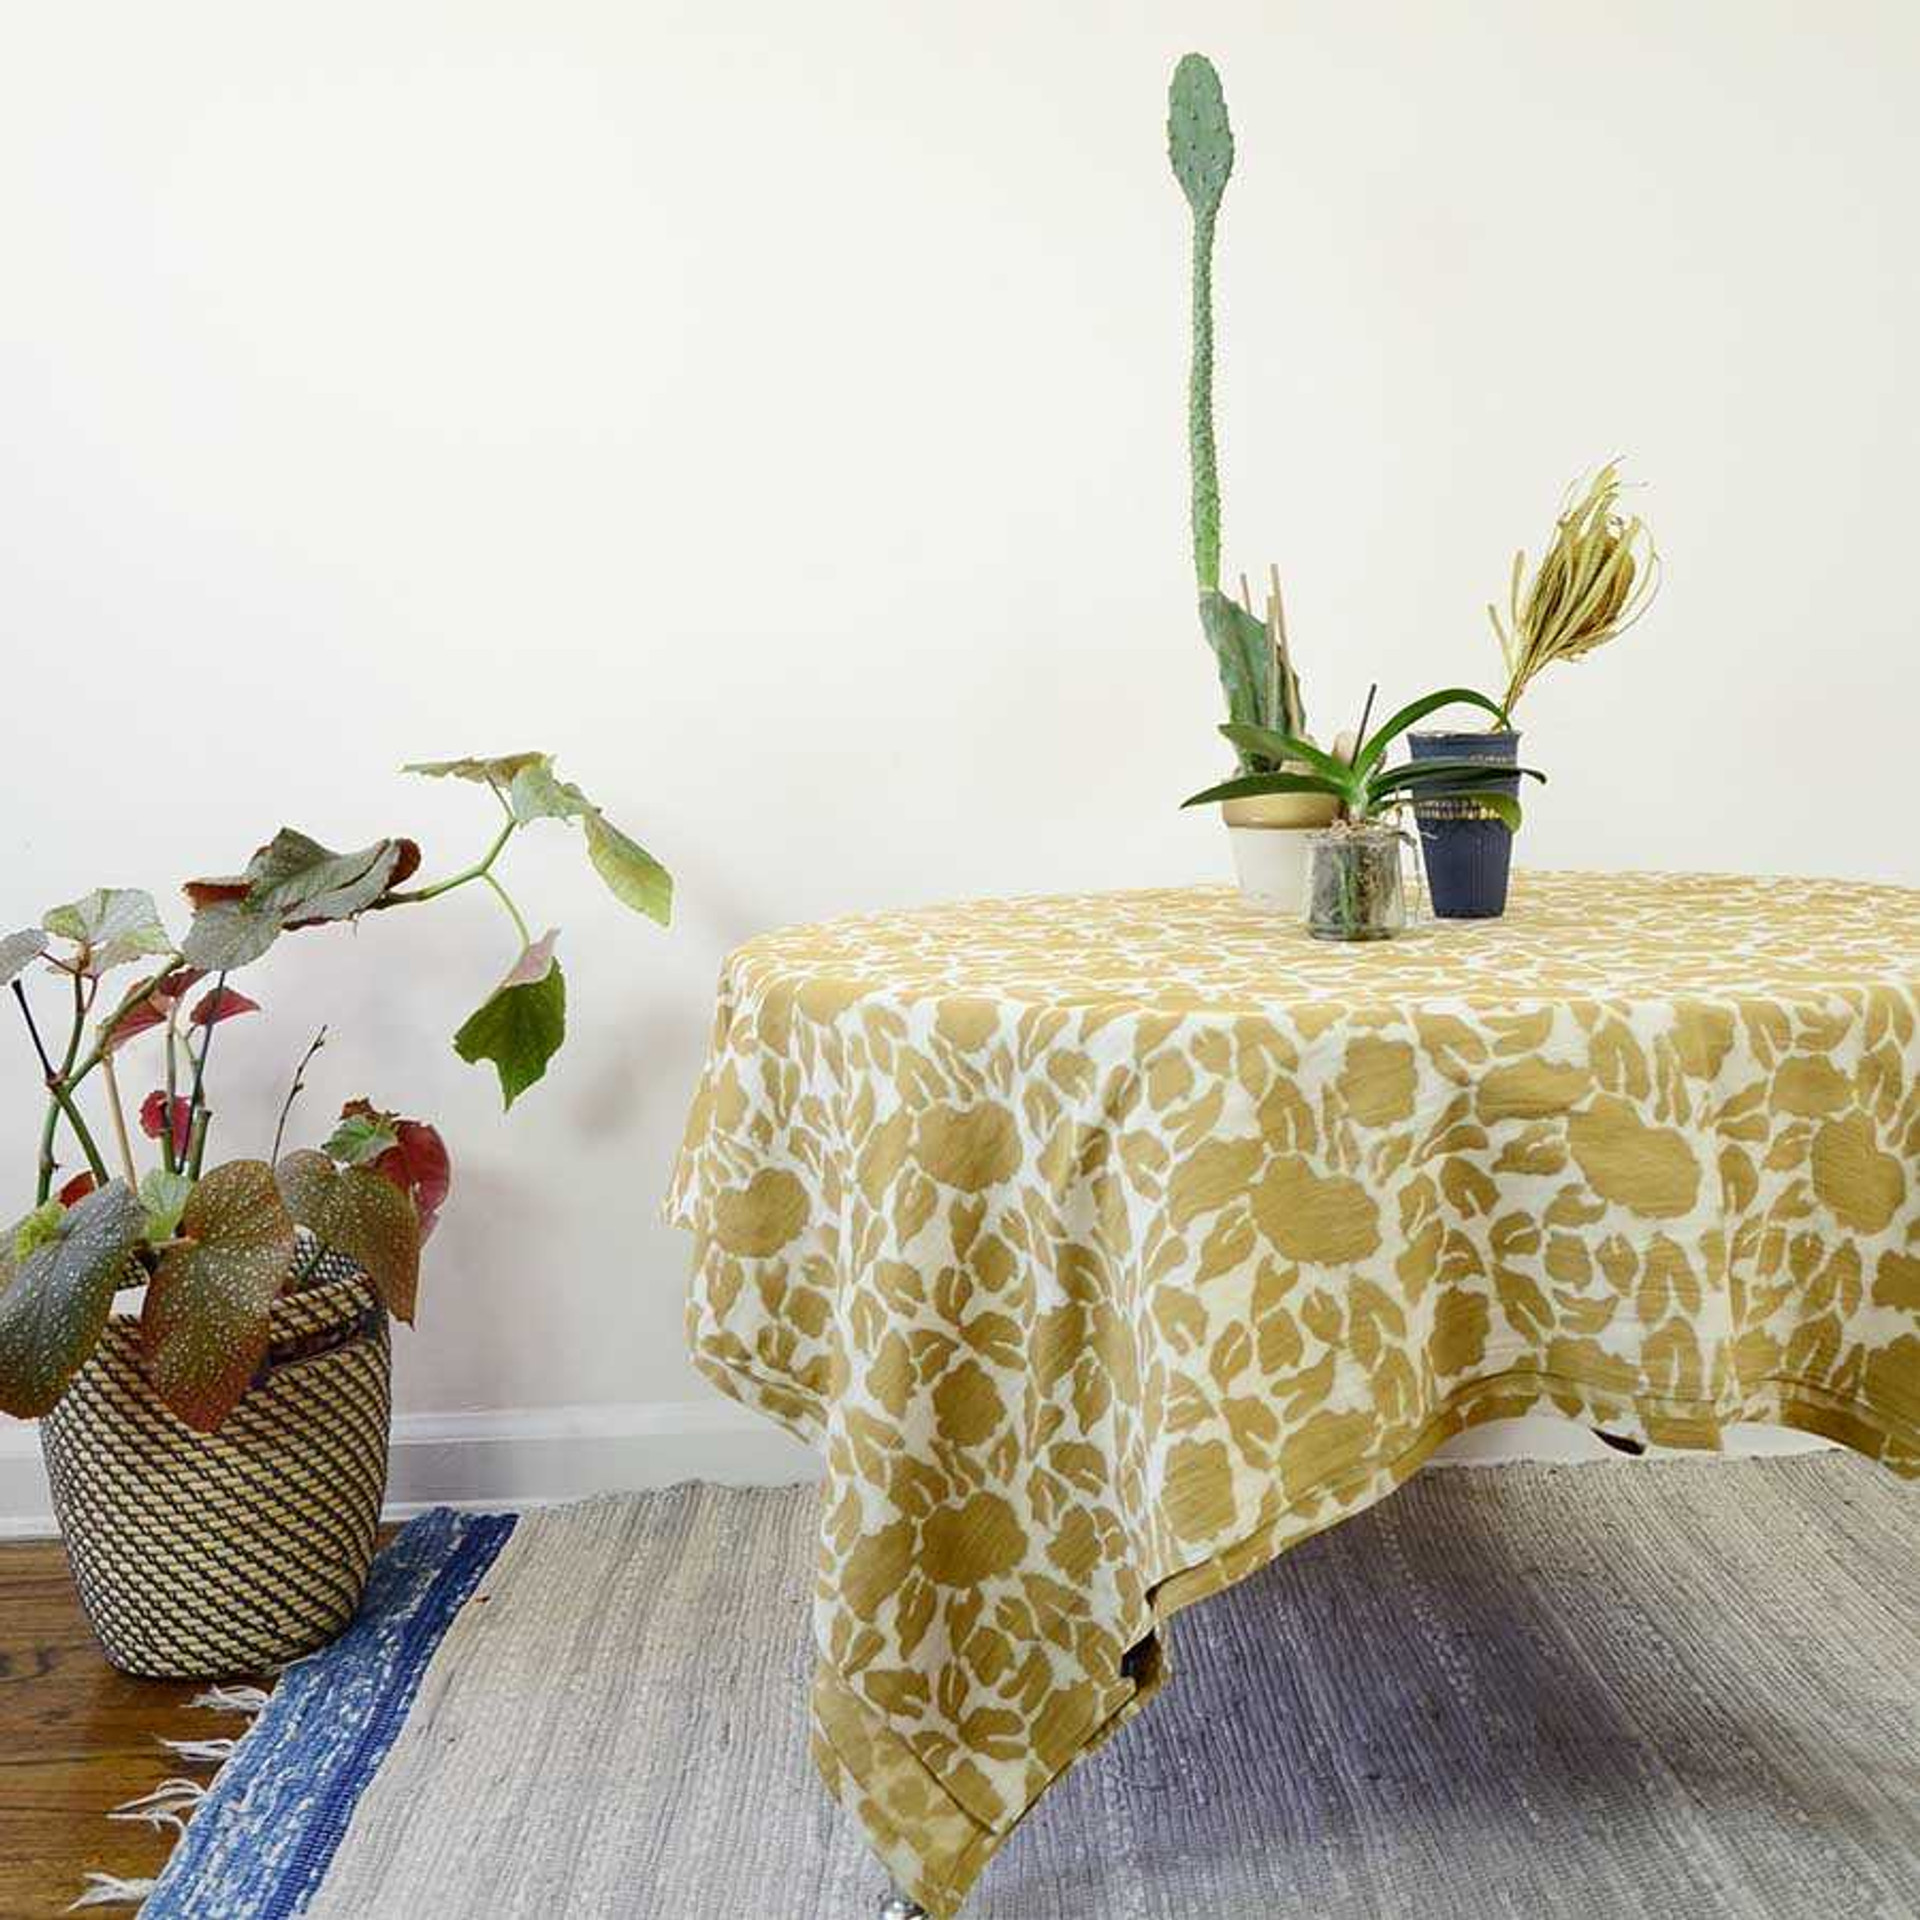 https://cdn11.bigcommerce.com/s-fb3s8/images/stencil/1920w/products/773/13807/organic_cotton_table_linens__21379_5937__96491.1695515067.jpg